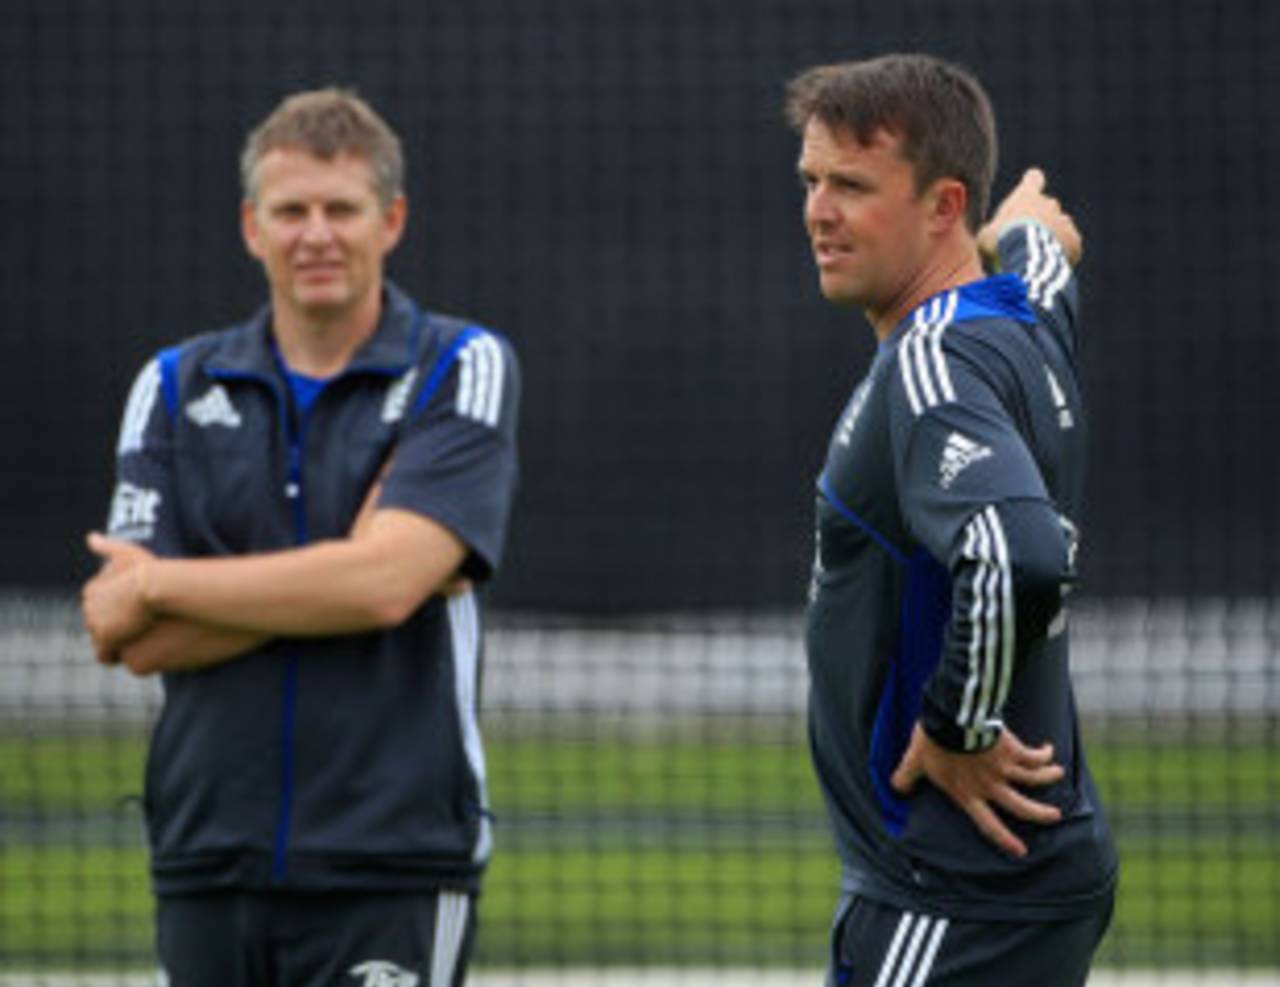 Graeme Swann uses his dodgy elbow to make a point, watched by England's spin-bowling coach Peter Such&nbsp;&nbsp;&bull;&nbsp;&nbsp;Getty Images